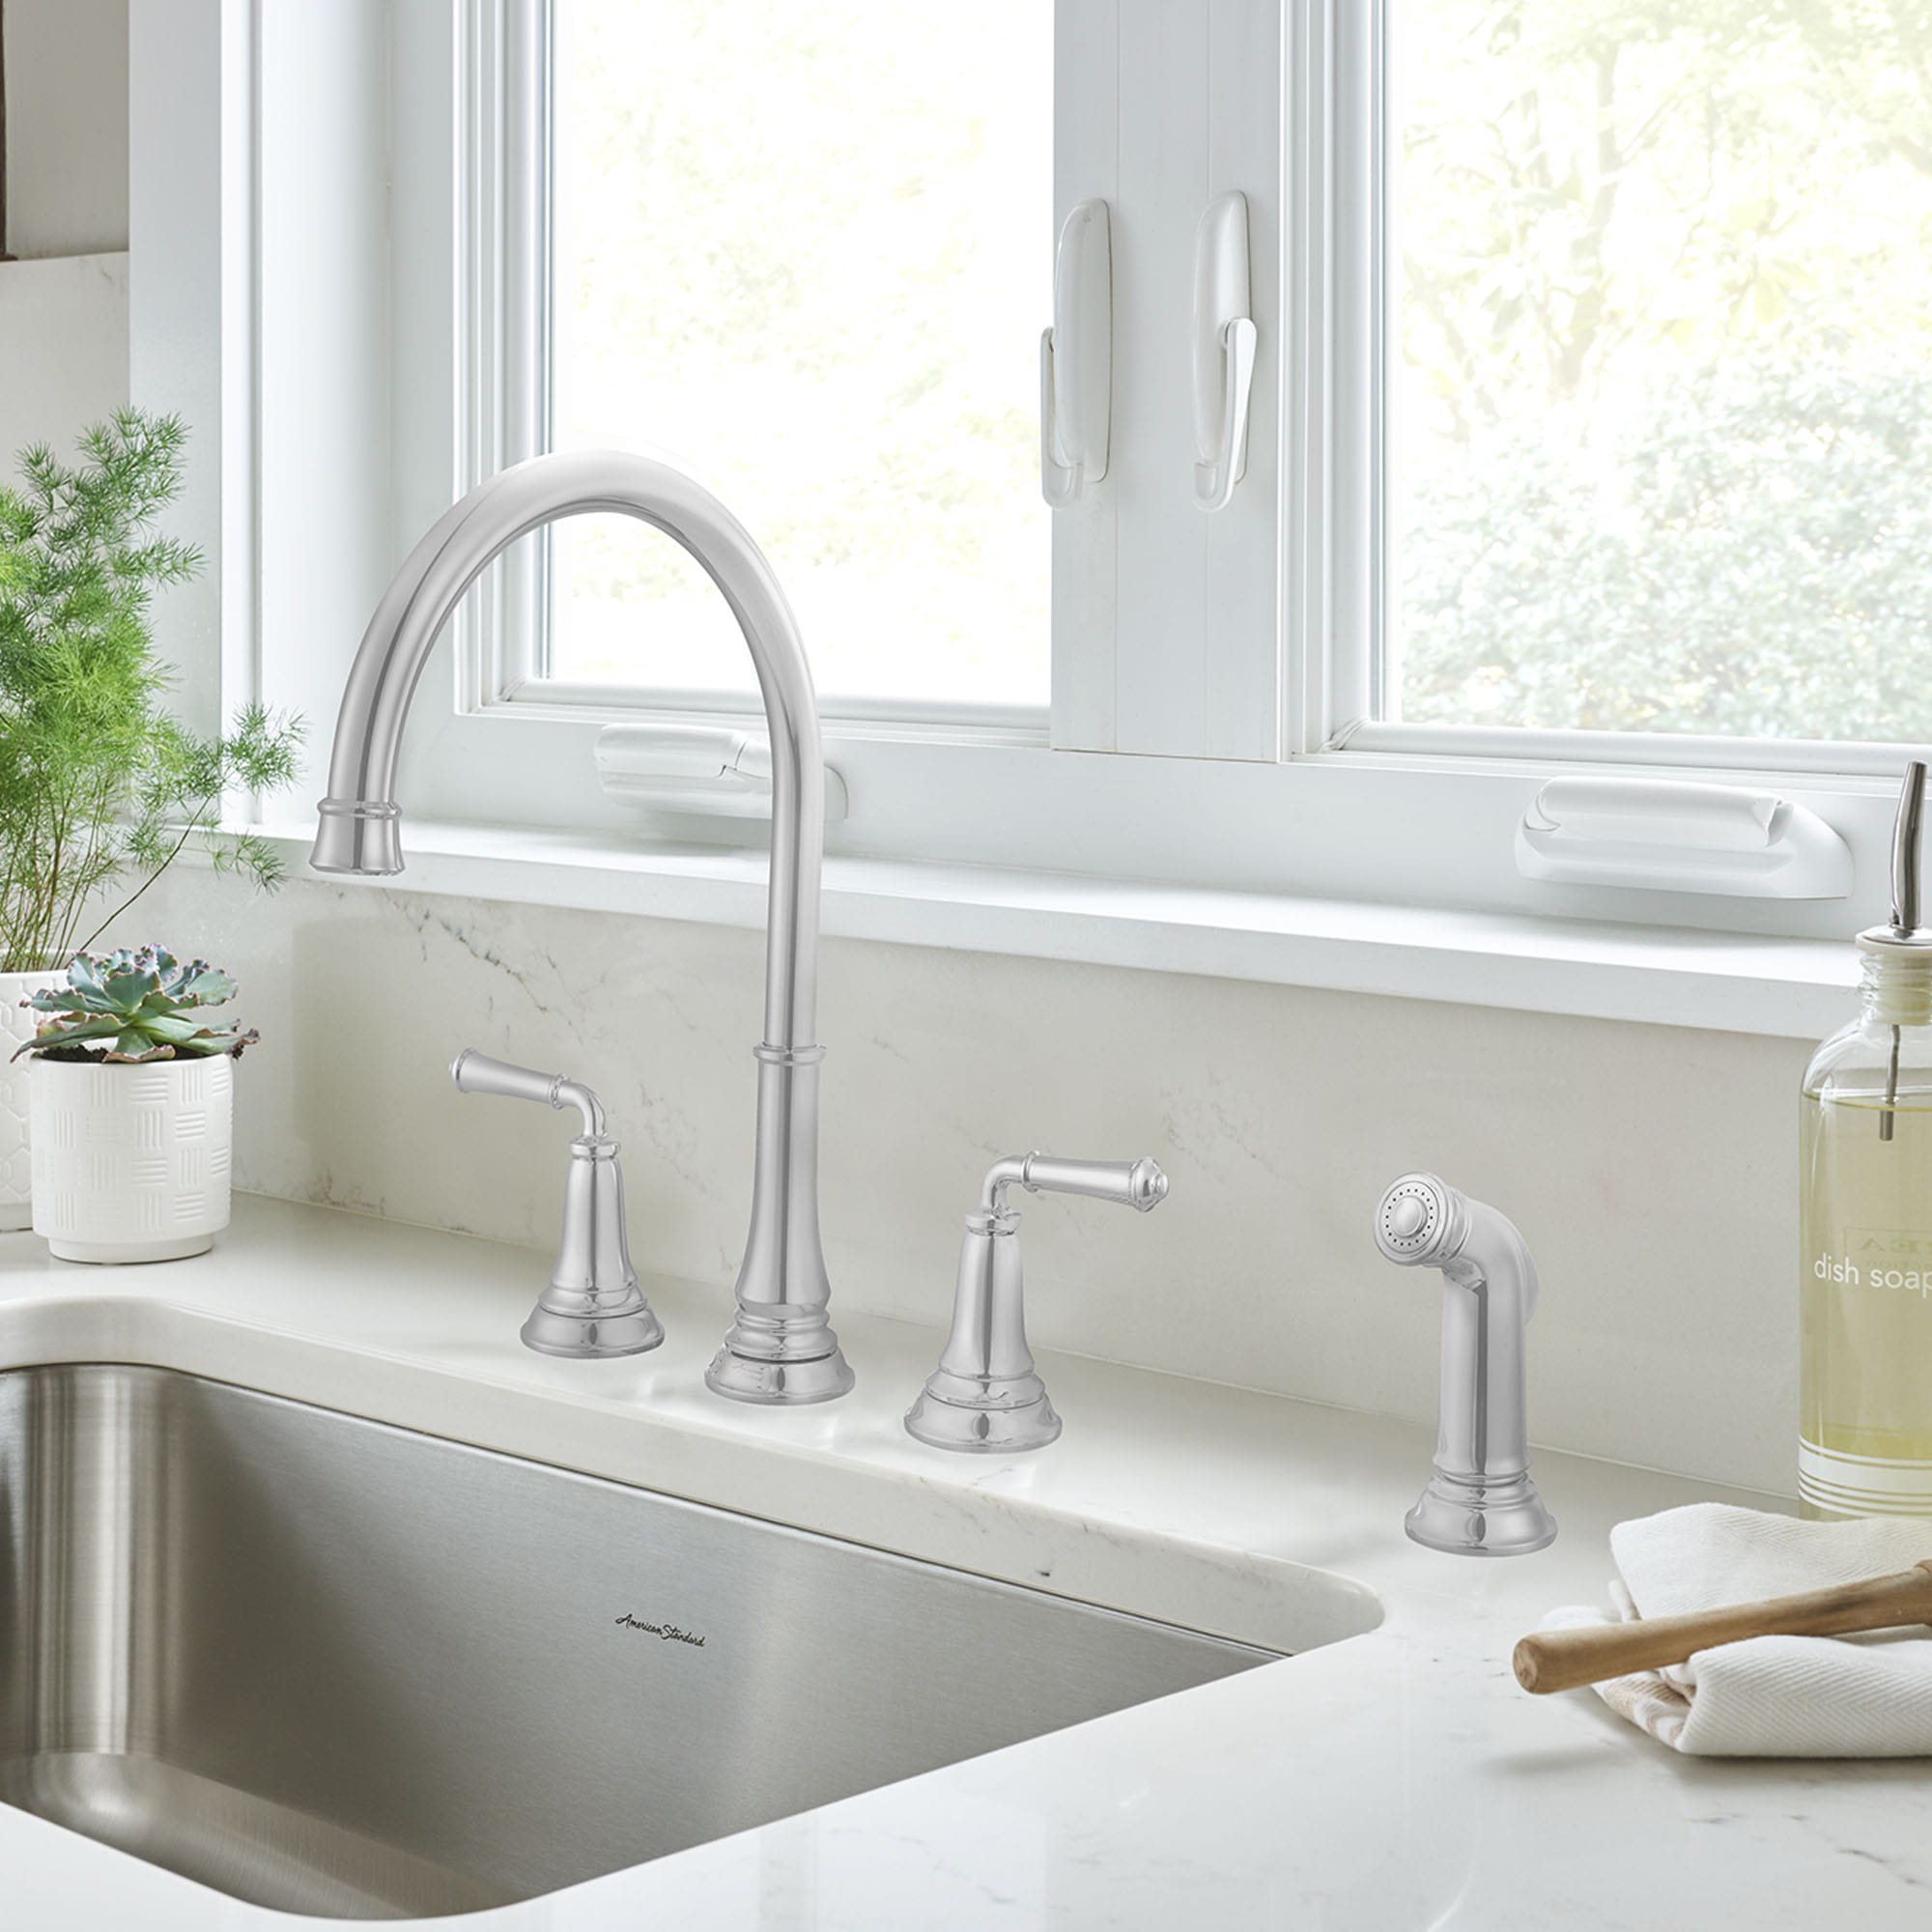 Delancey® 2-Handle Widespread Kitchen Faucet 1.5 gpm/5.7 L/min With Side Spray